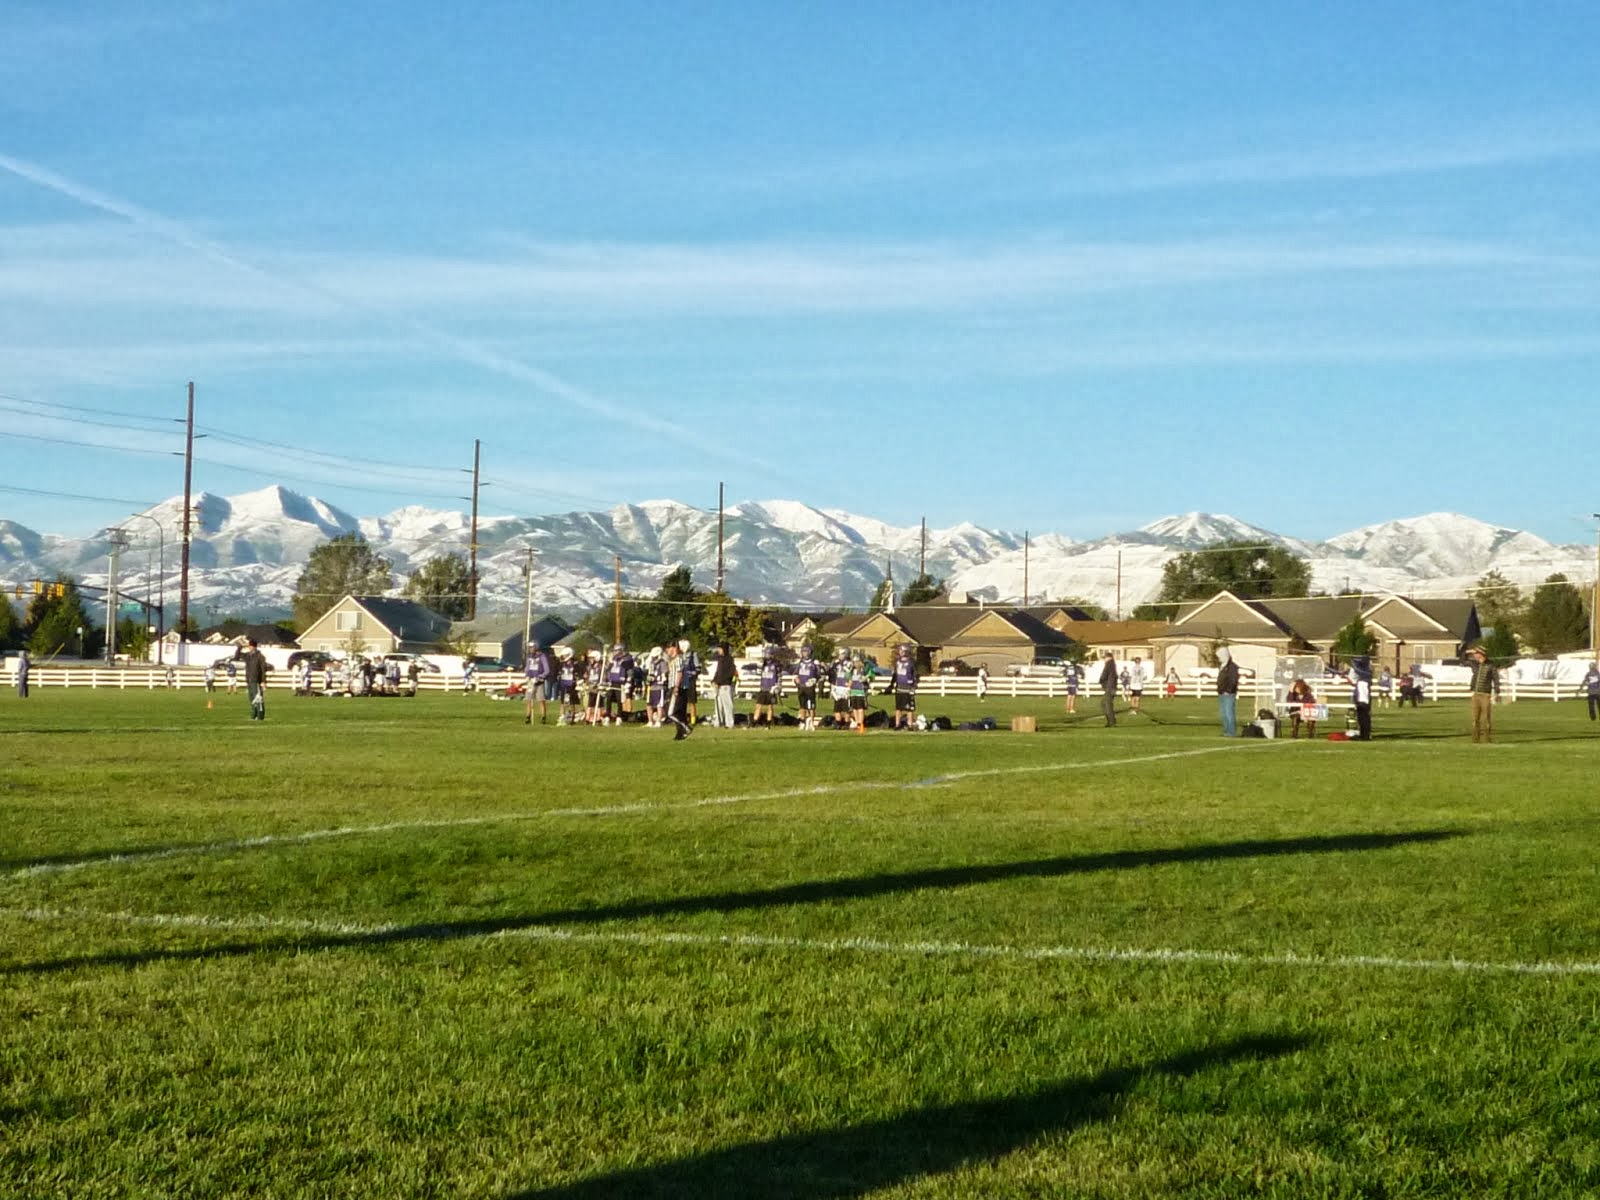 Dawson's lacrosse game is about to begin.